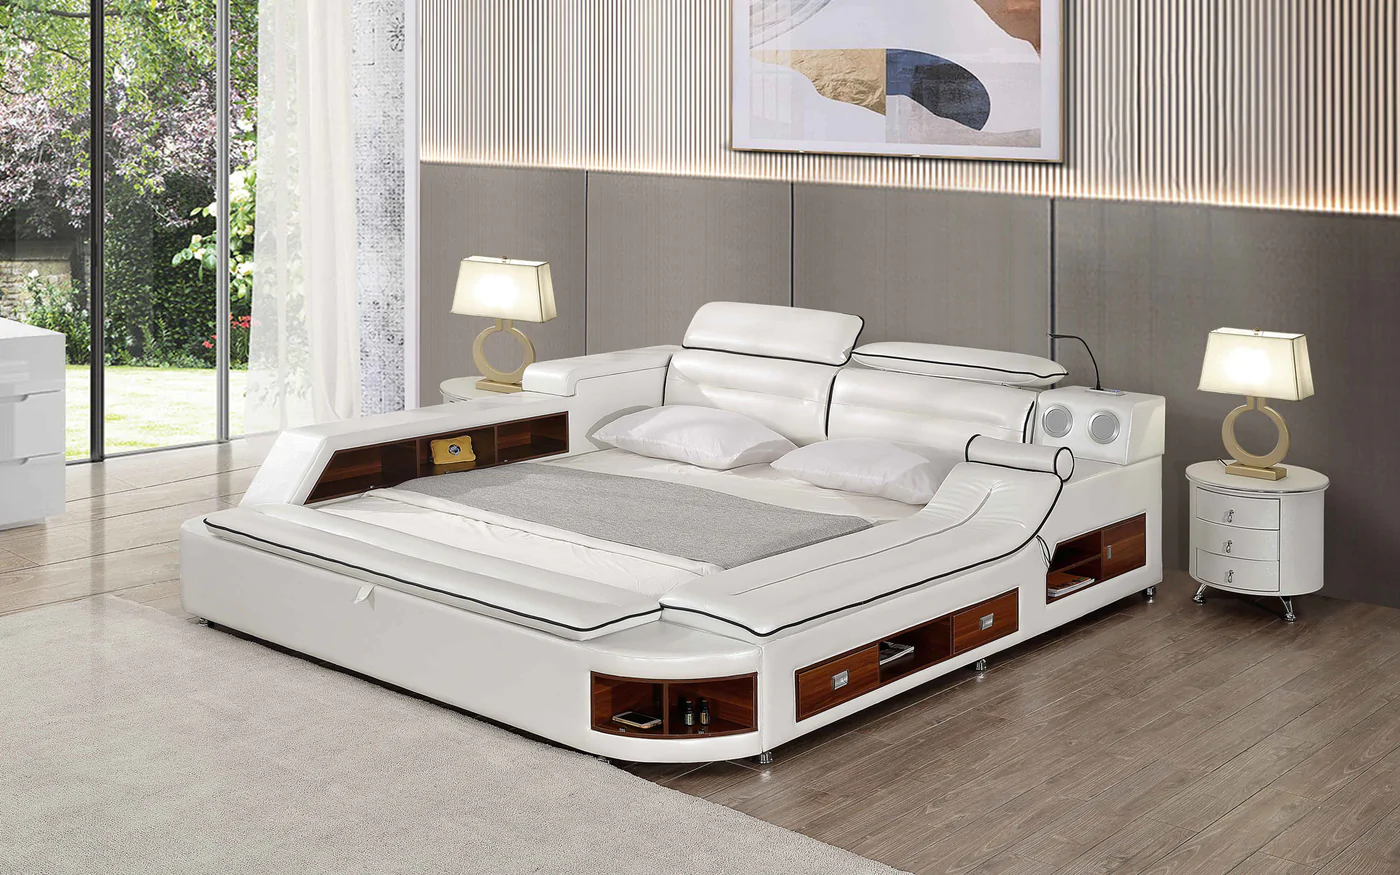 Smart Beds, Smart Bed Price, Ultimate Smart Bed, Smart Ultra Modern Luxury Bed, Smart Furniture Bed, Modern Smart Bed, Smart Ultra Modern Luxury Bed With Couch, Smartwood Bed, Smart Bed Room, Future Smart Bed, Smart Beds For Sale, Multifunctional Smart Bed, Tech Smart Ultimate Bed, The Ultimate Smart Bed, Smart Ultimate Bed, Smart Double Bed, High Tech Smart Bed, Smart Multifunctional Bed, Smart Bed With Massage Chair, Smart Bed King Size, Tech Smart Bed, Luxury Smart Bed, Smart Luxury Bed.